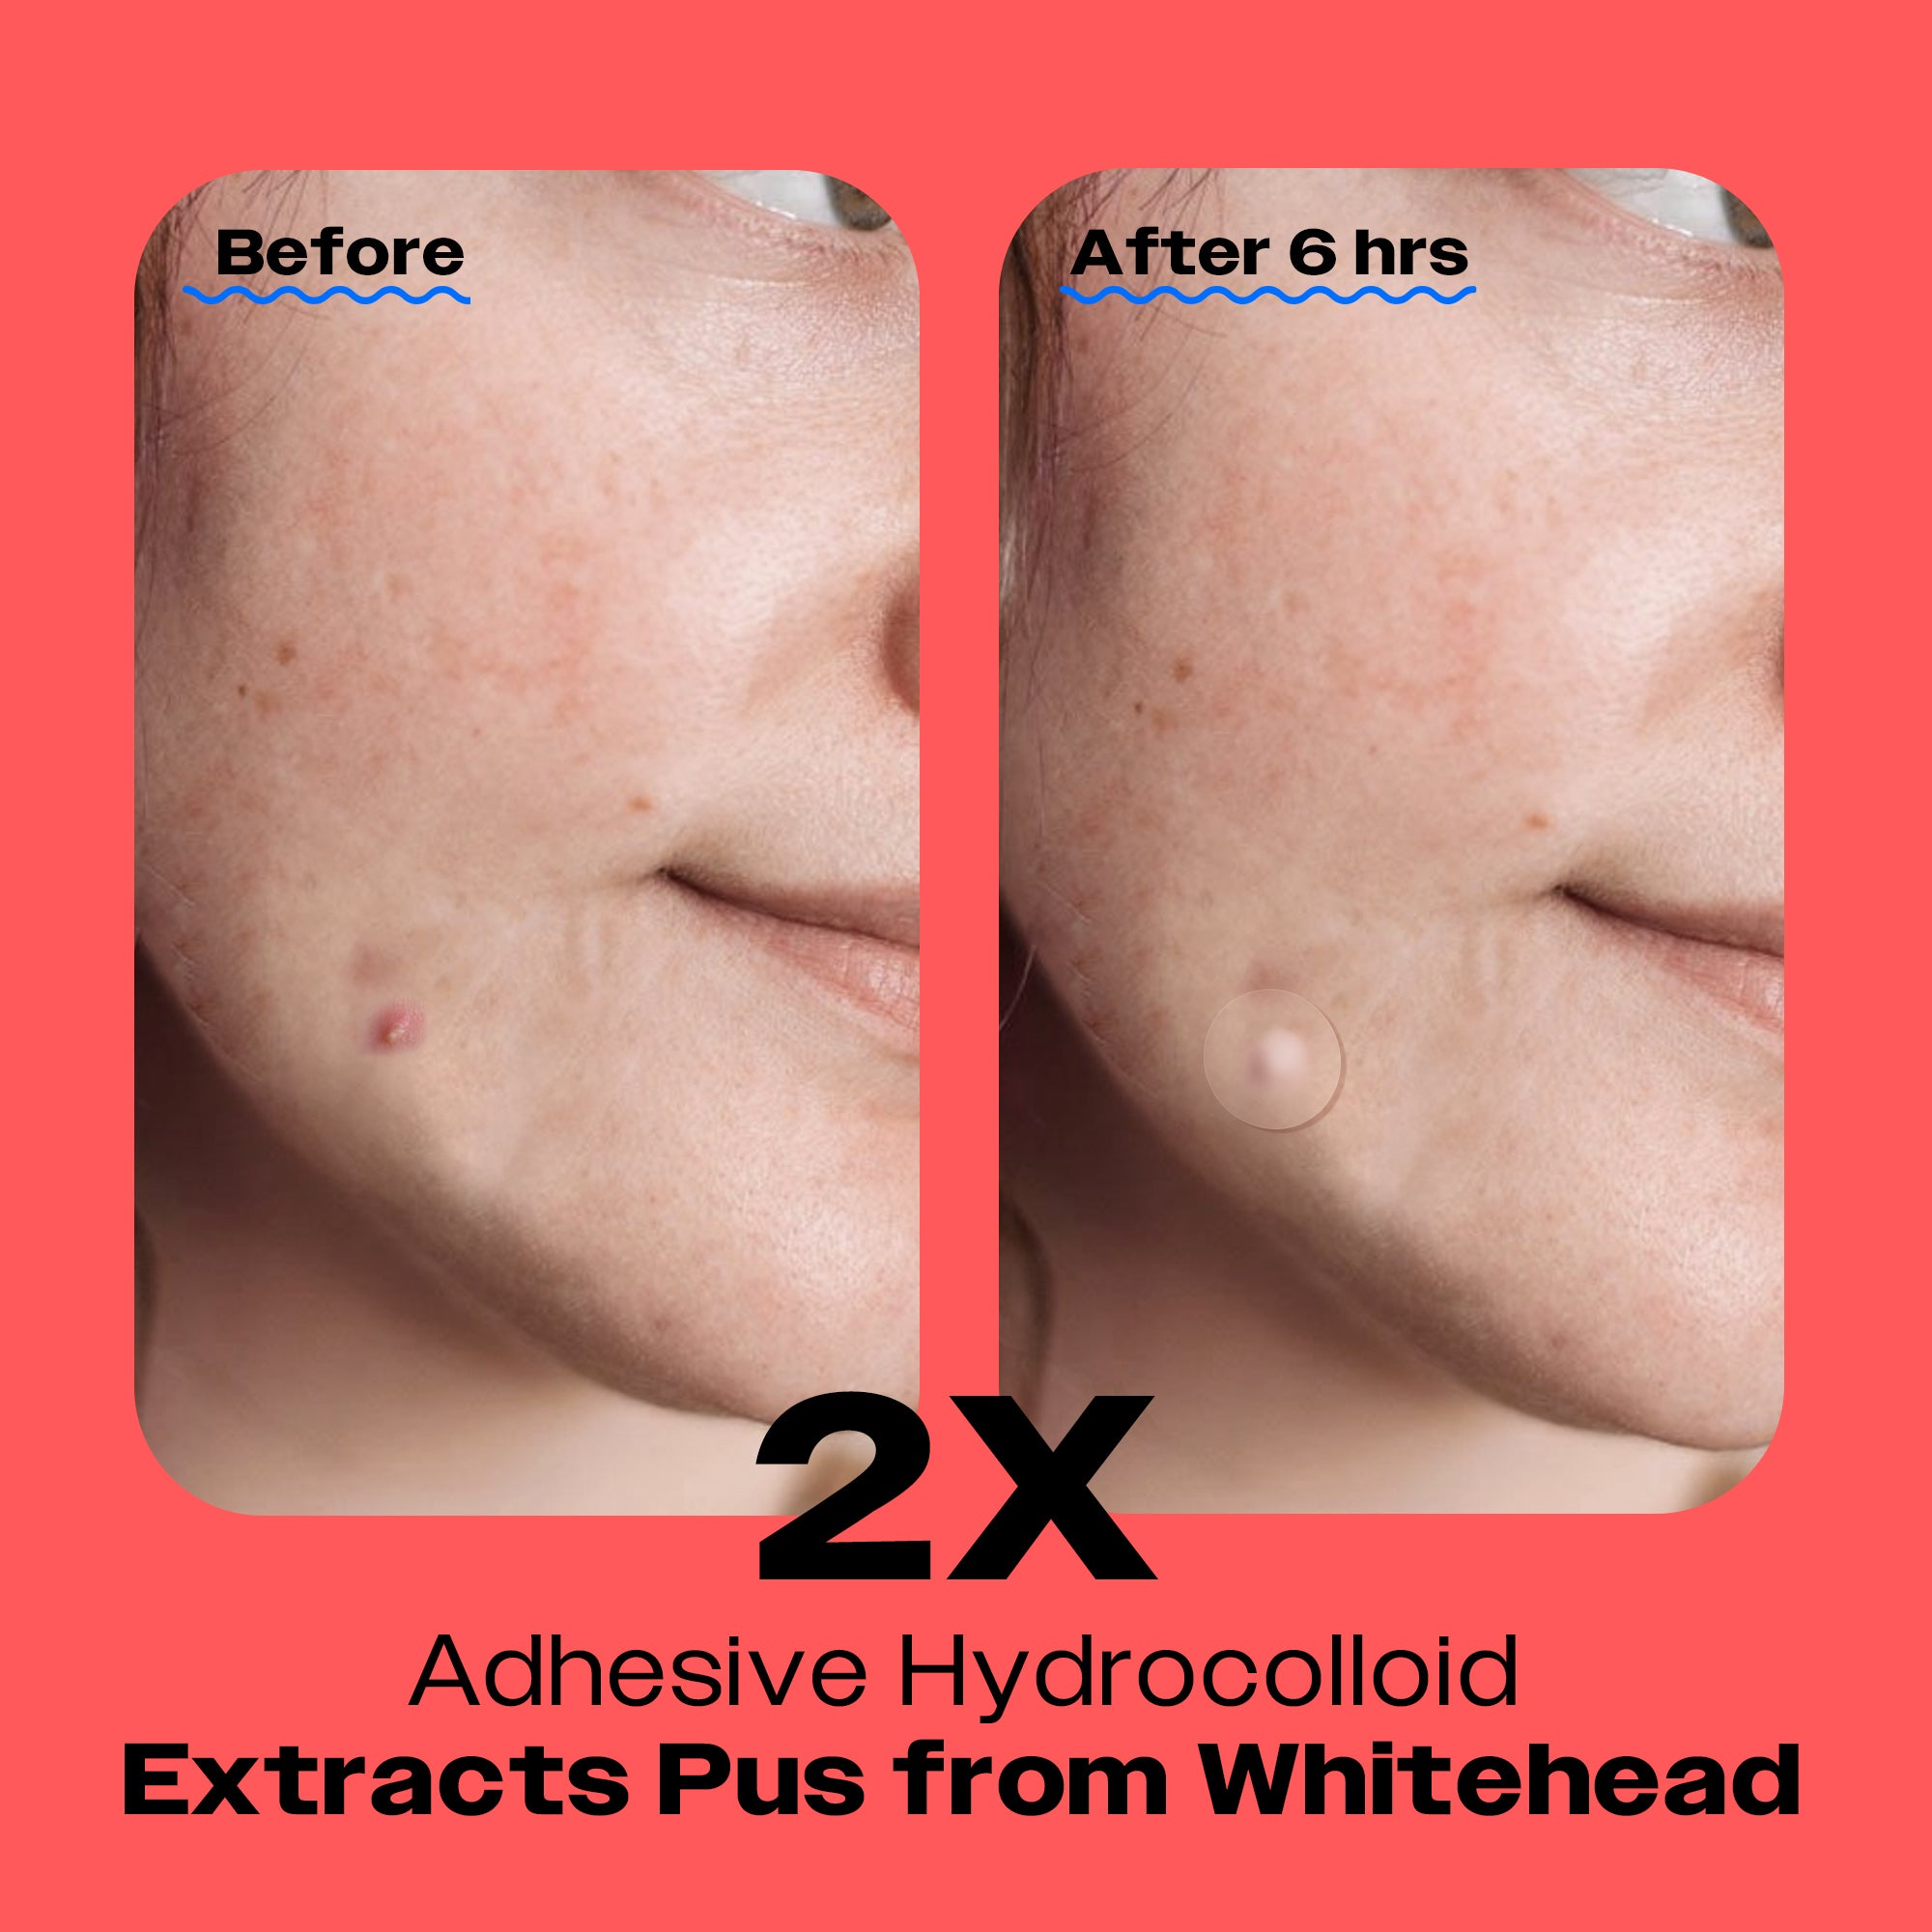 Comparison of skin before and after using Avarelle's ZitOut Original 80 acne patch with adhesive hydrocolloid for 6 hours to extract pus from a whitehead.